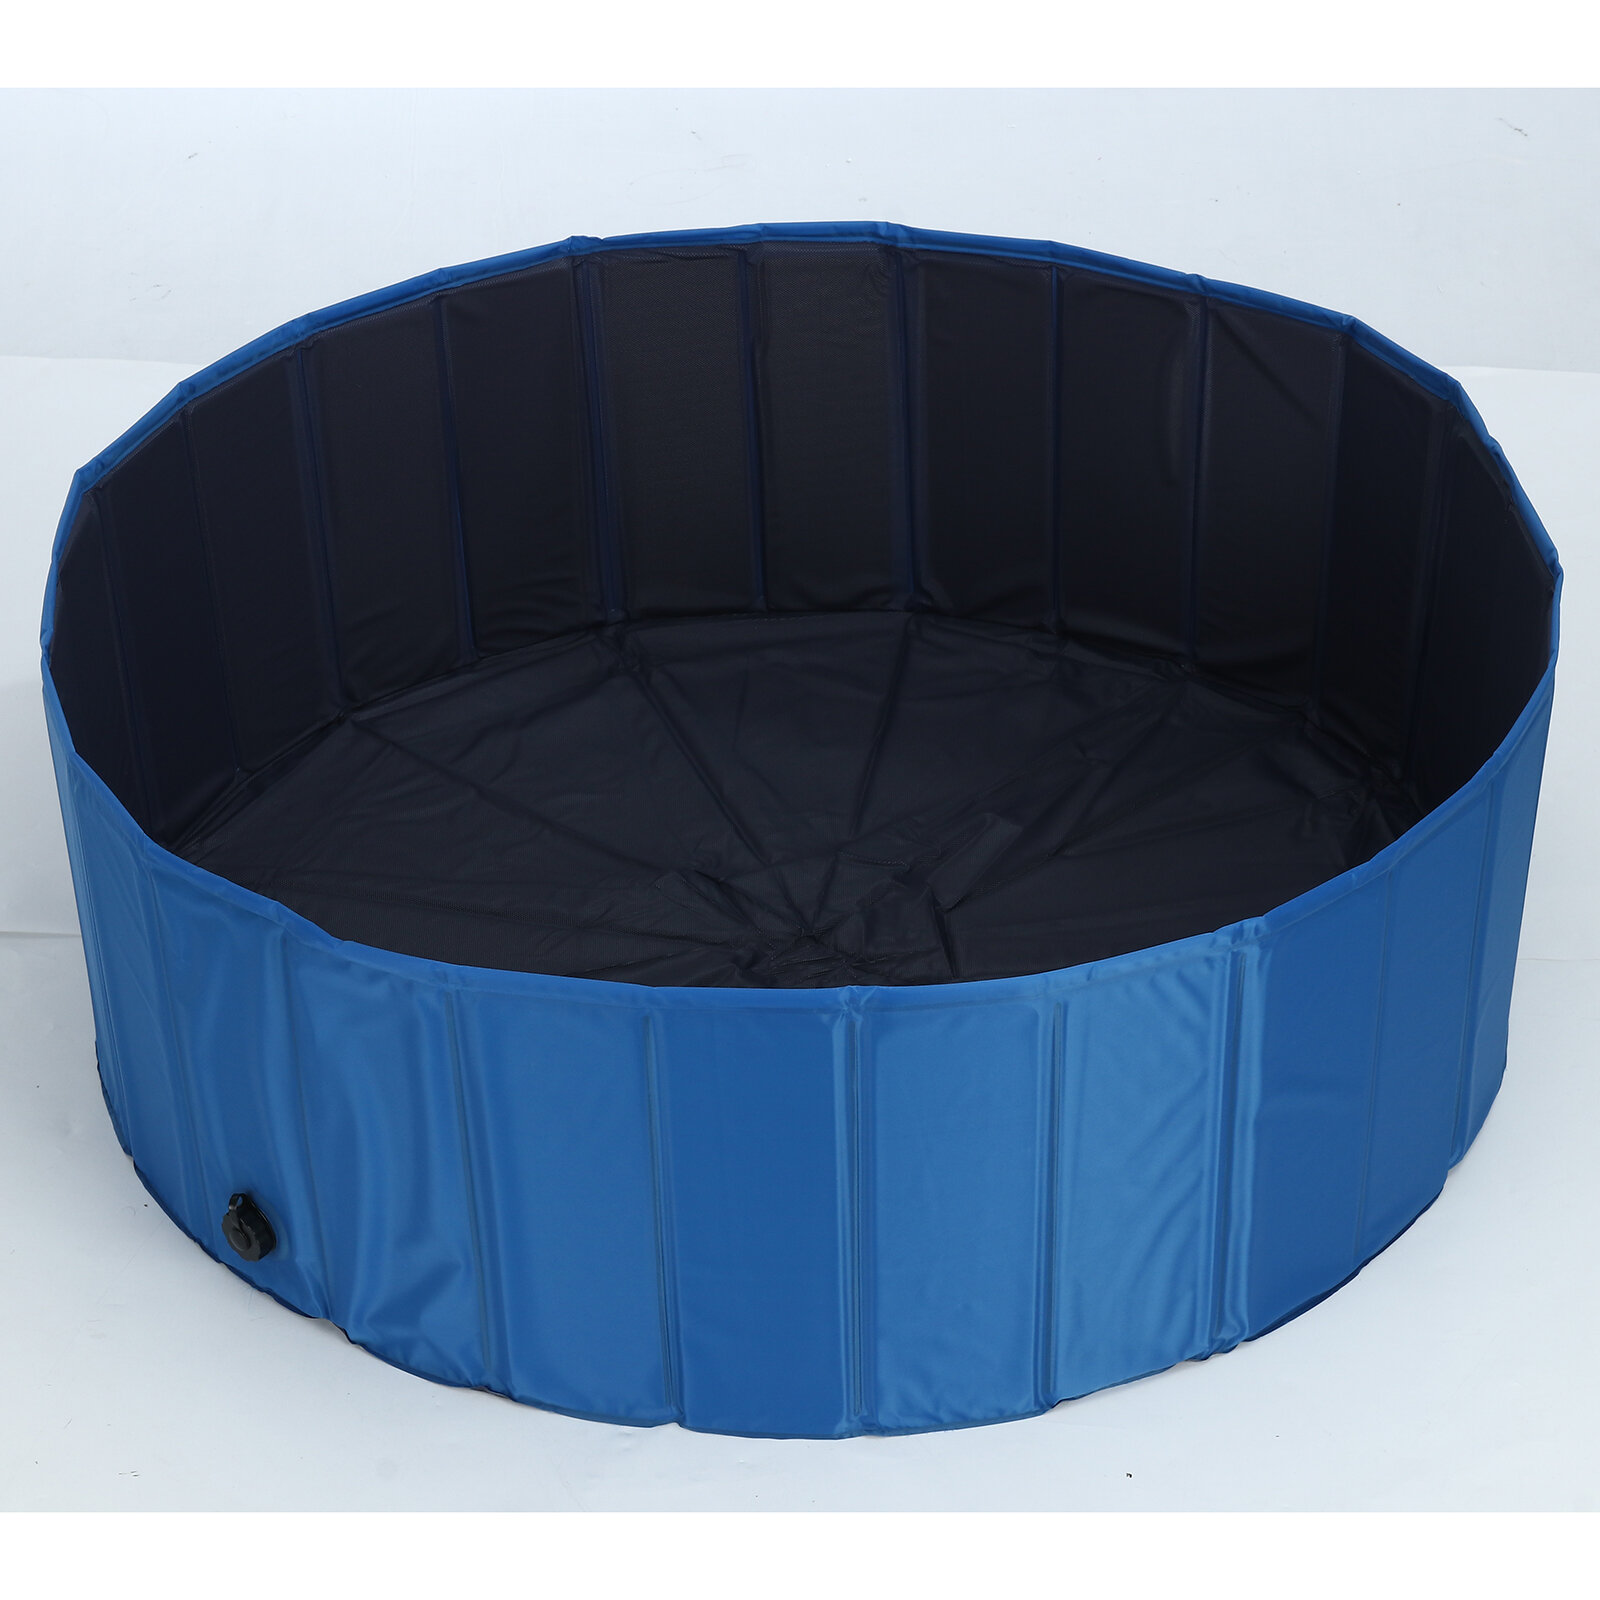 Collapsible Portable Pet Bath Pool Kids And Pets Friendly Material Easy Assembly Suitable for Kids, Cats, Dogs or Other Pets-heyidear